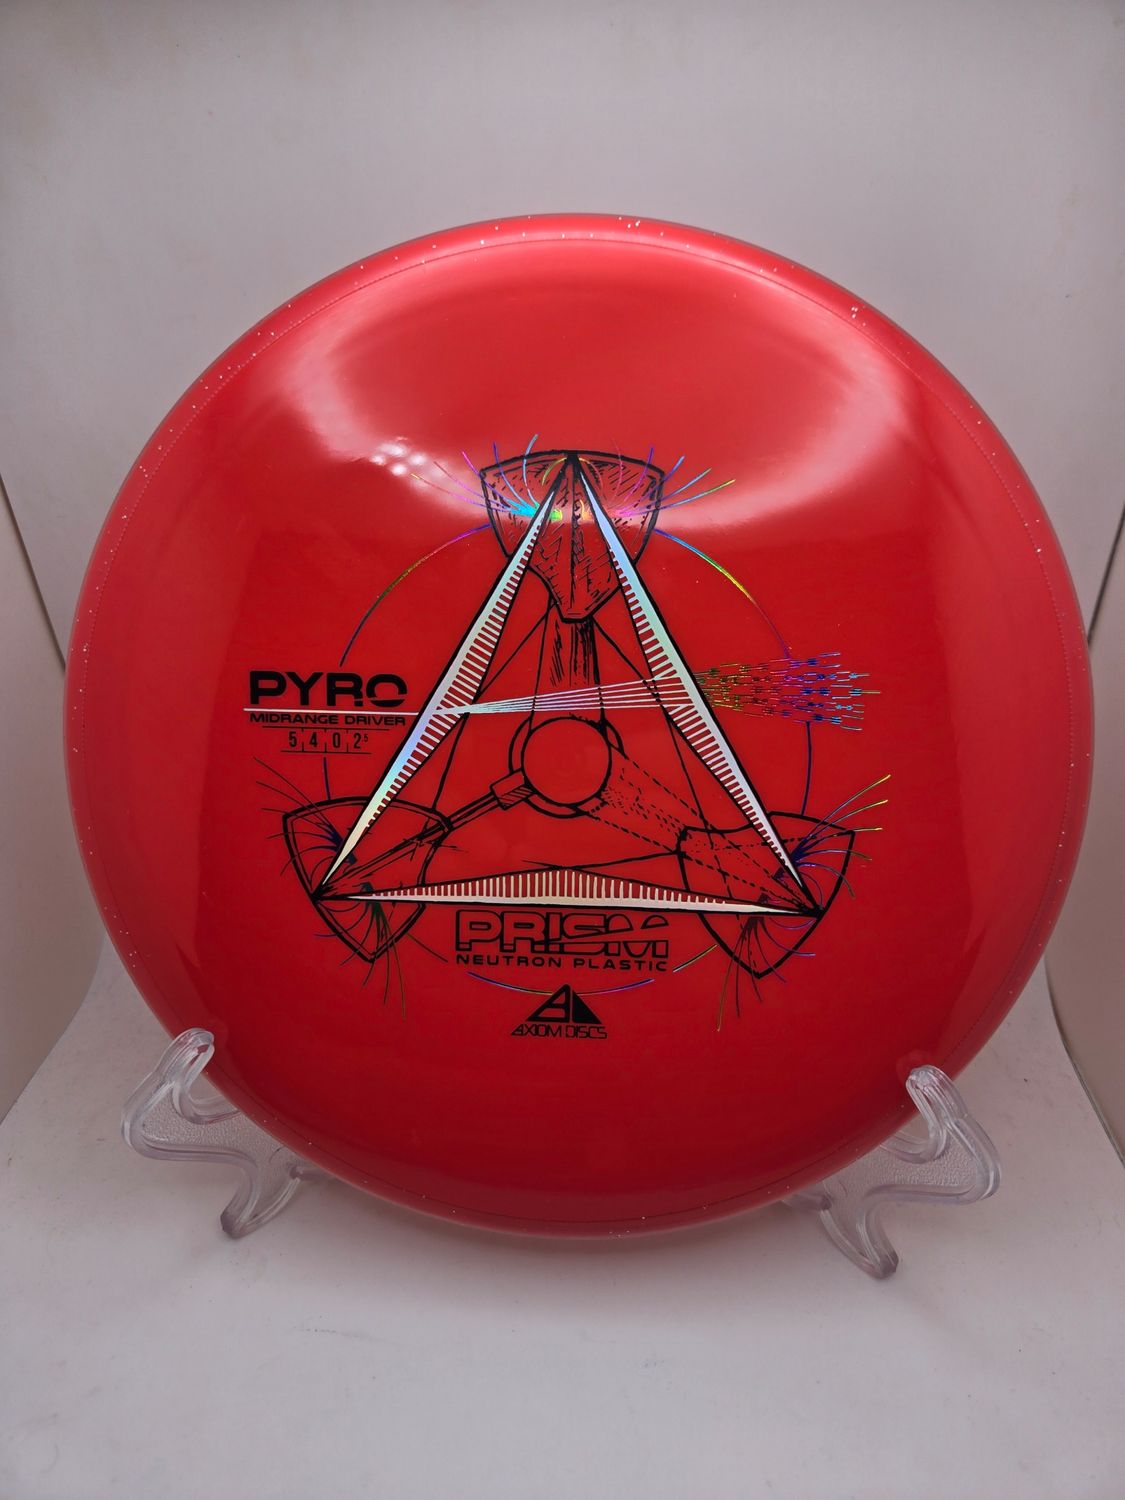 Axiom Discs Pyro Prism Neutron Plastic Red with Red sparkly rim 172g